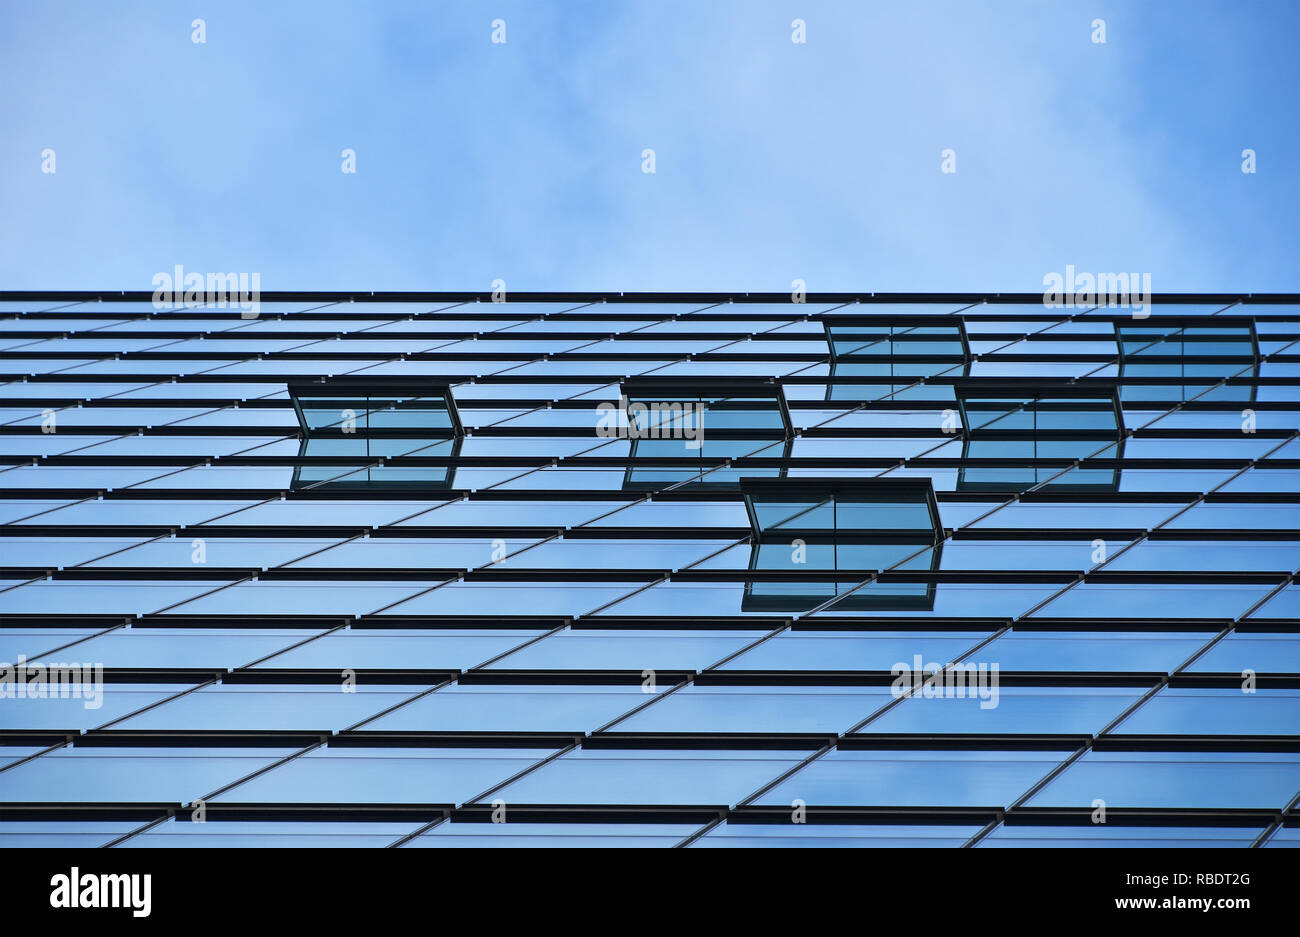 Background texture of modern business skyscraper building glass windows pattern with reflection over cloudy blue sky, low angle view Stock Photo